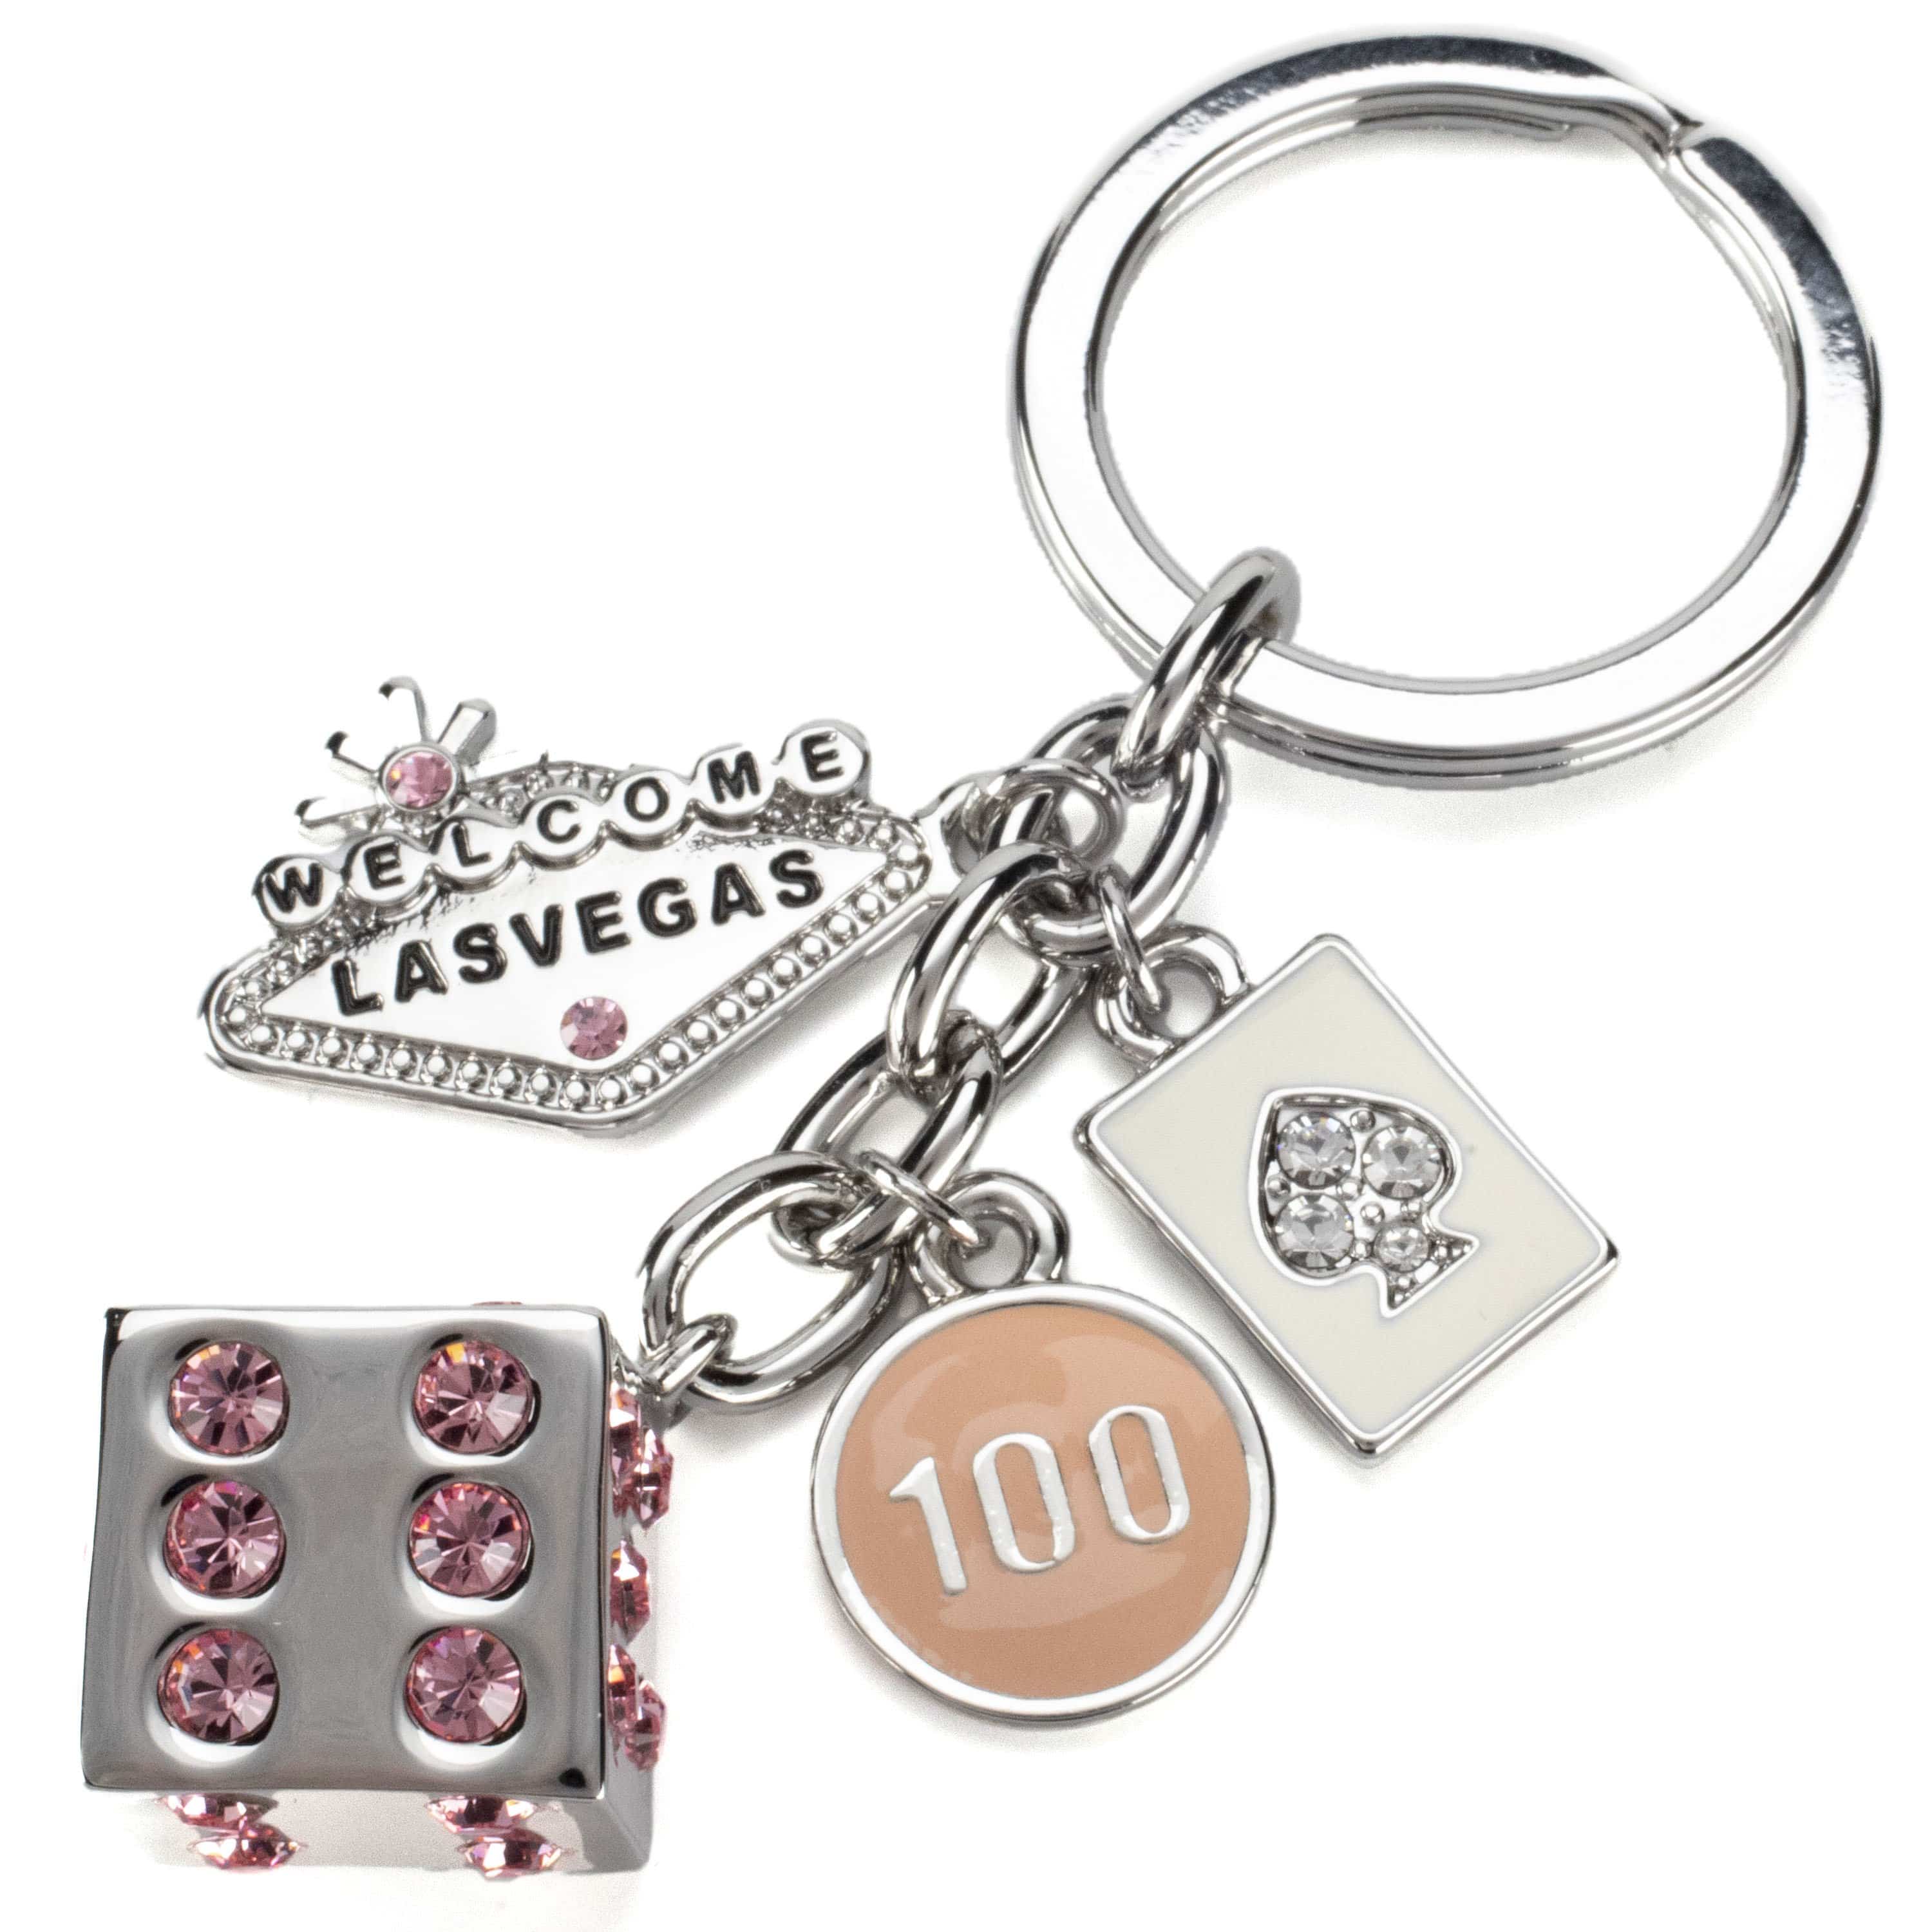 Las Vegas Welcome Sign Gold Dice Keychain made with Swarovski Crystals